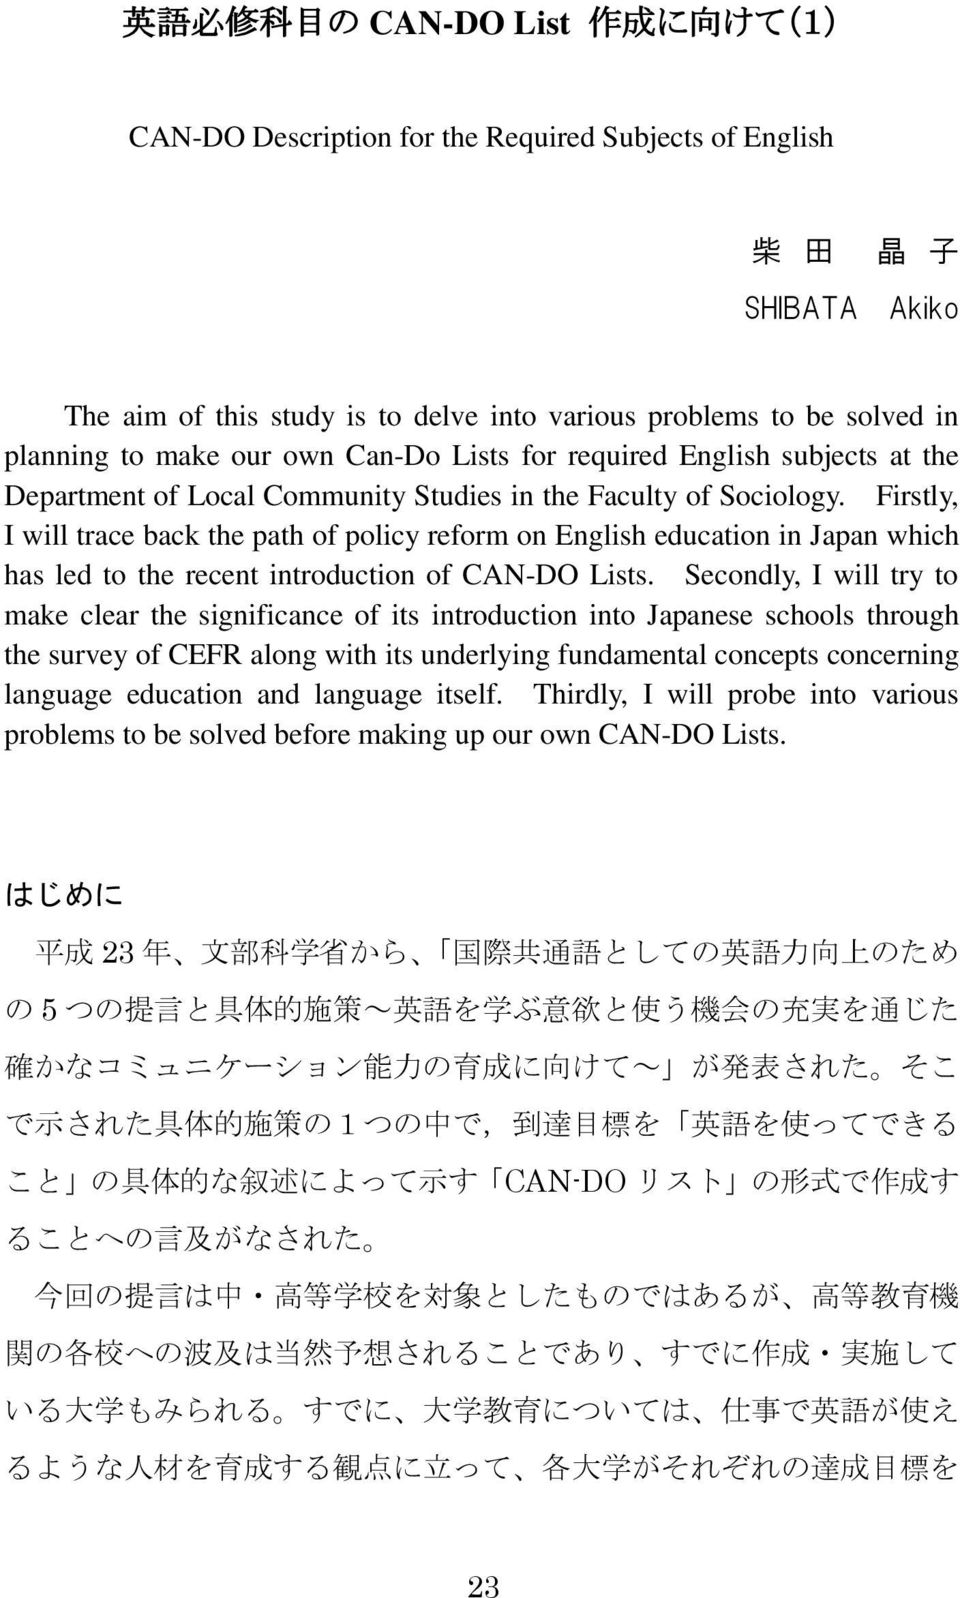 Firstly, I will trace back the path of policy reform on English education in Japan which has led to the recent introduction of CAN-DO Lists.